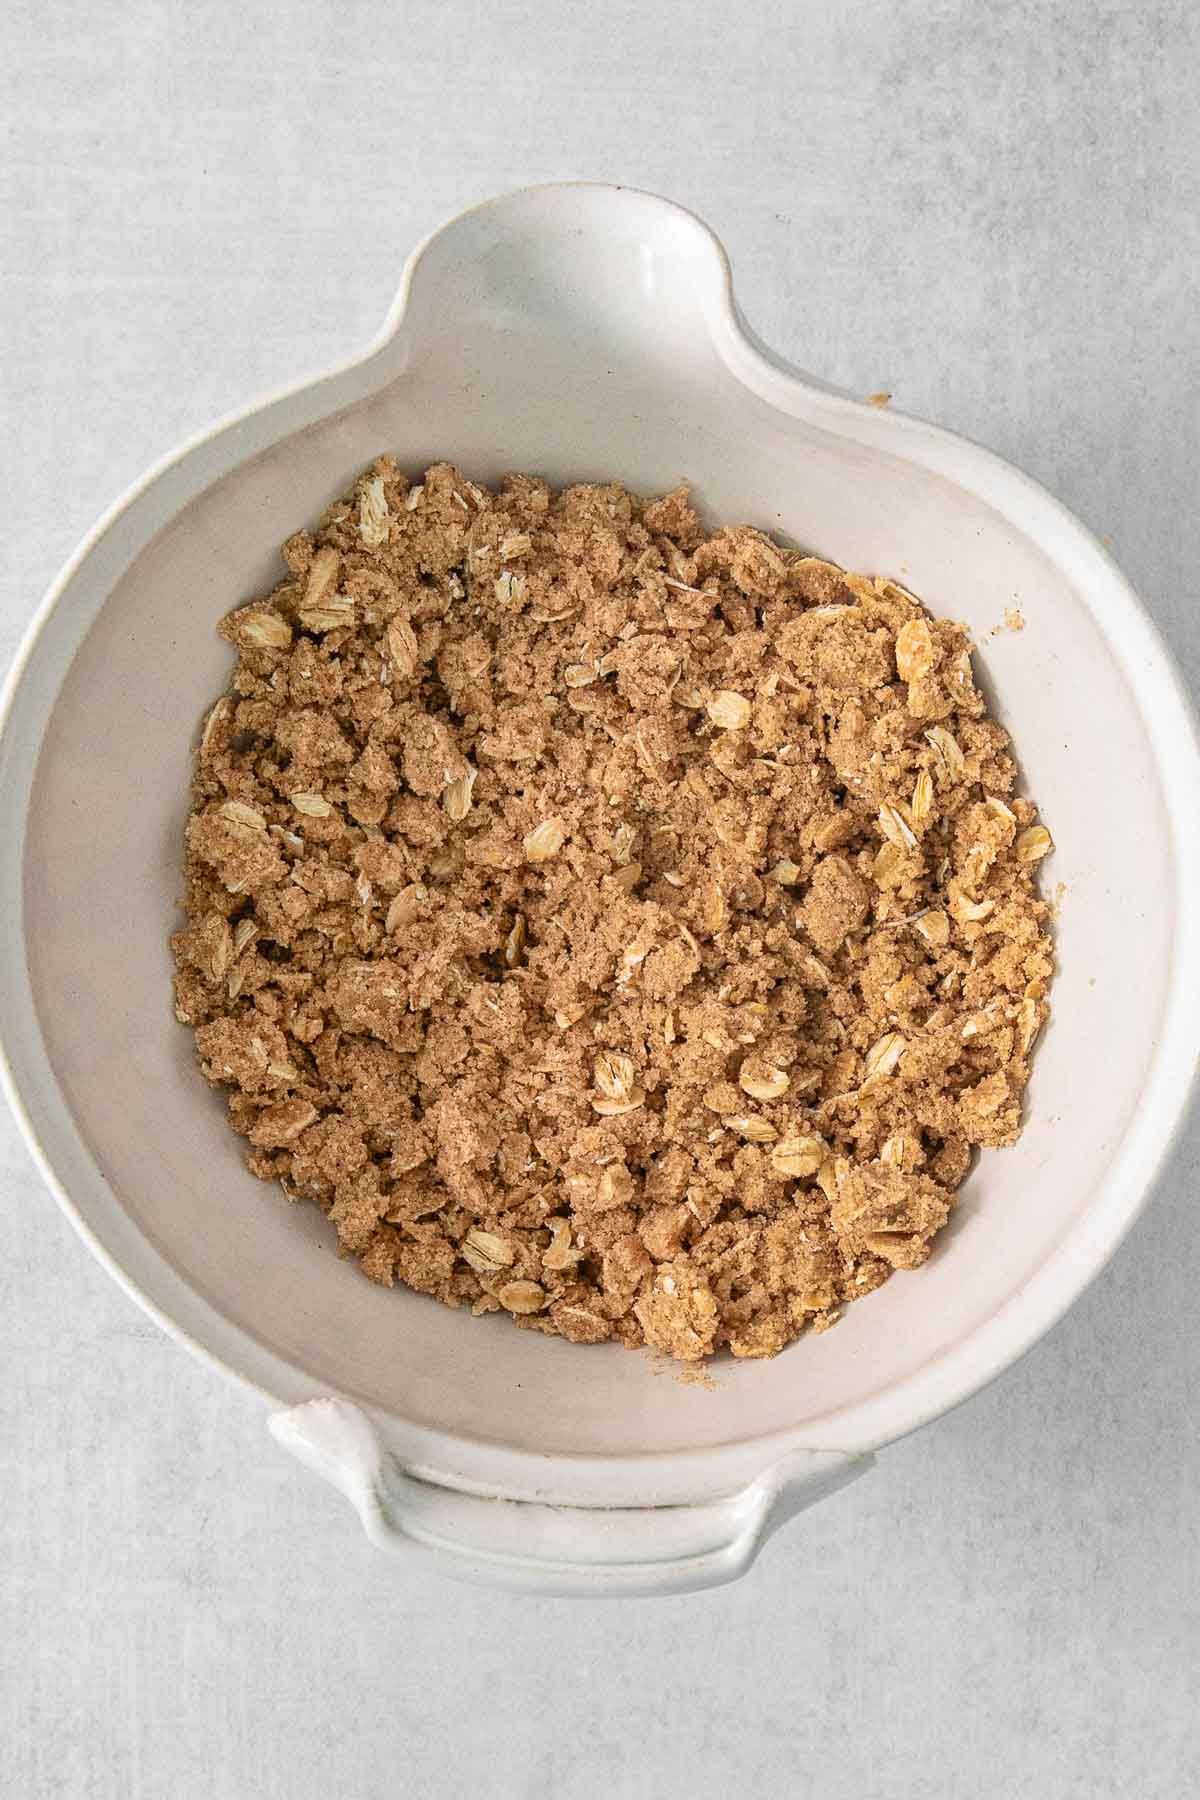 Crumble mix in a large white bowl.